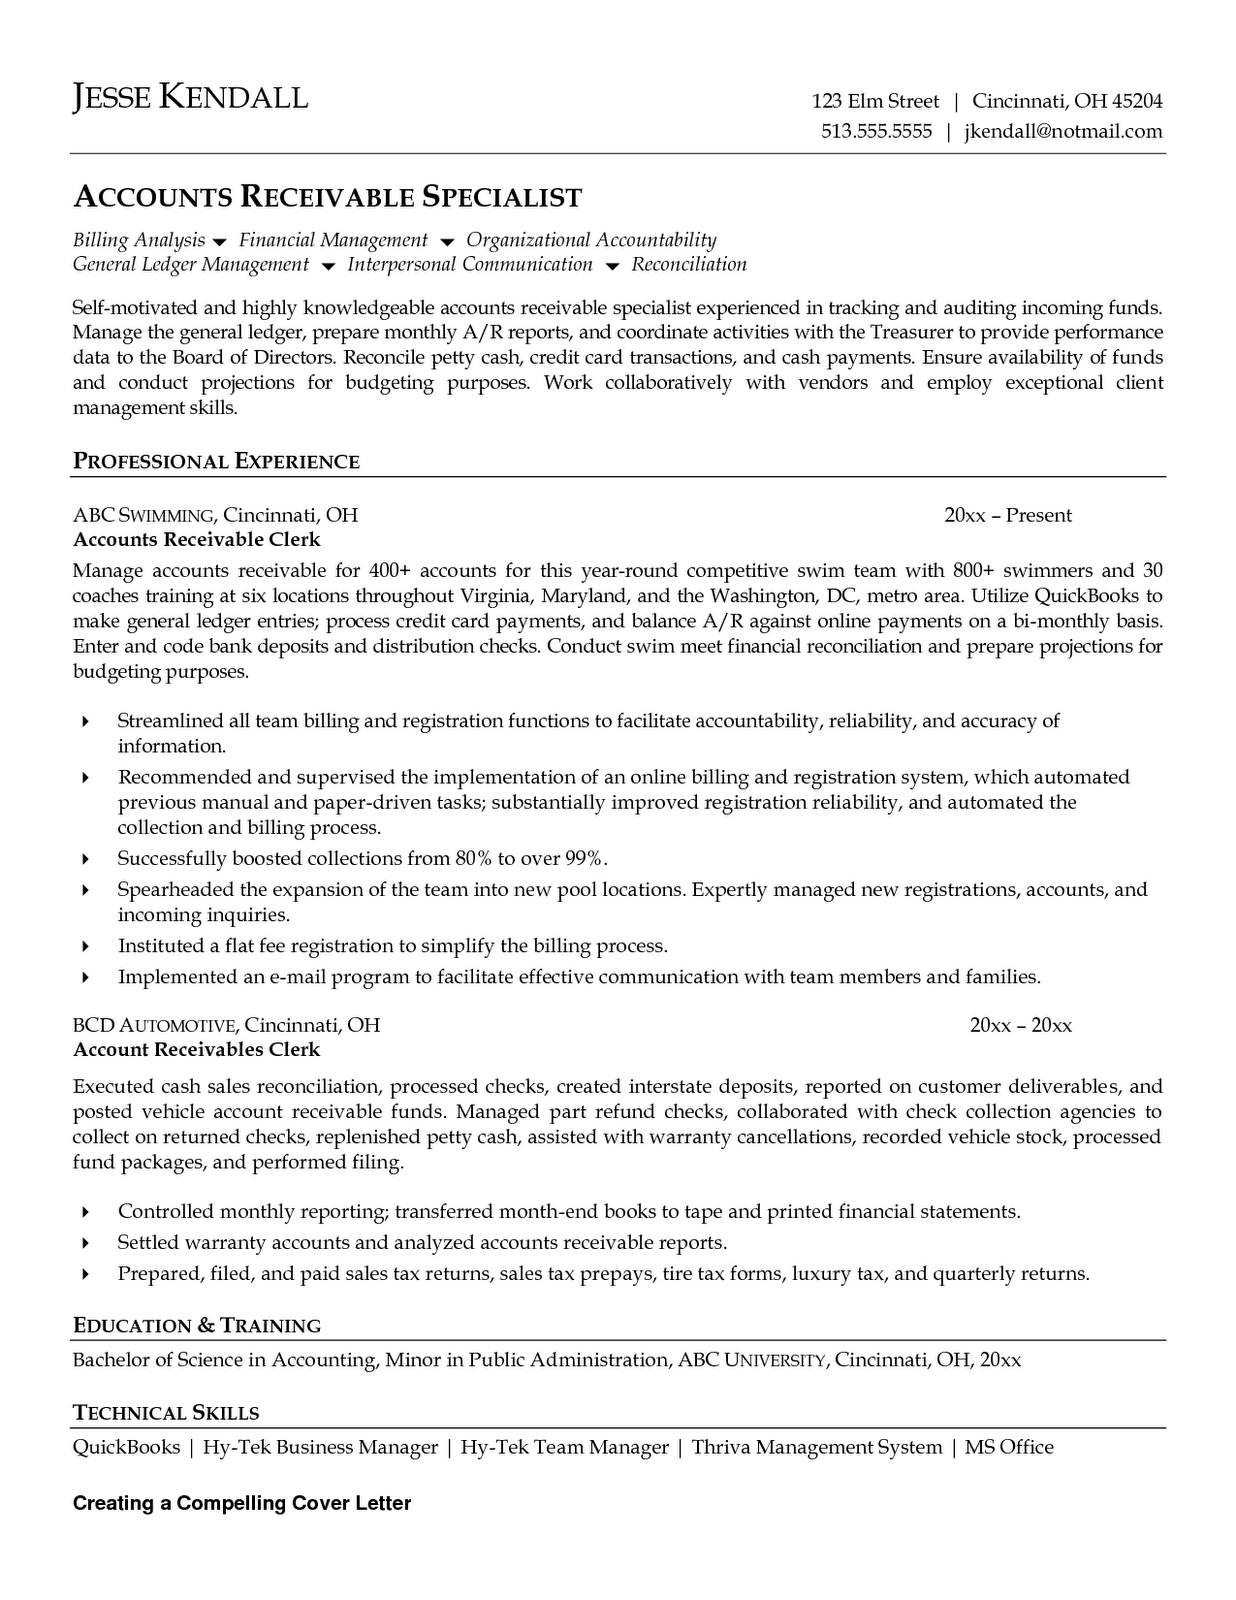 Resume templates for office clerical positions